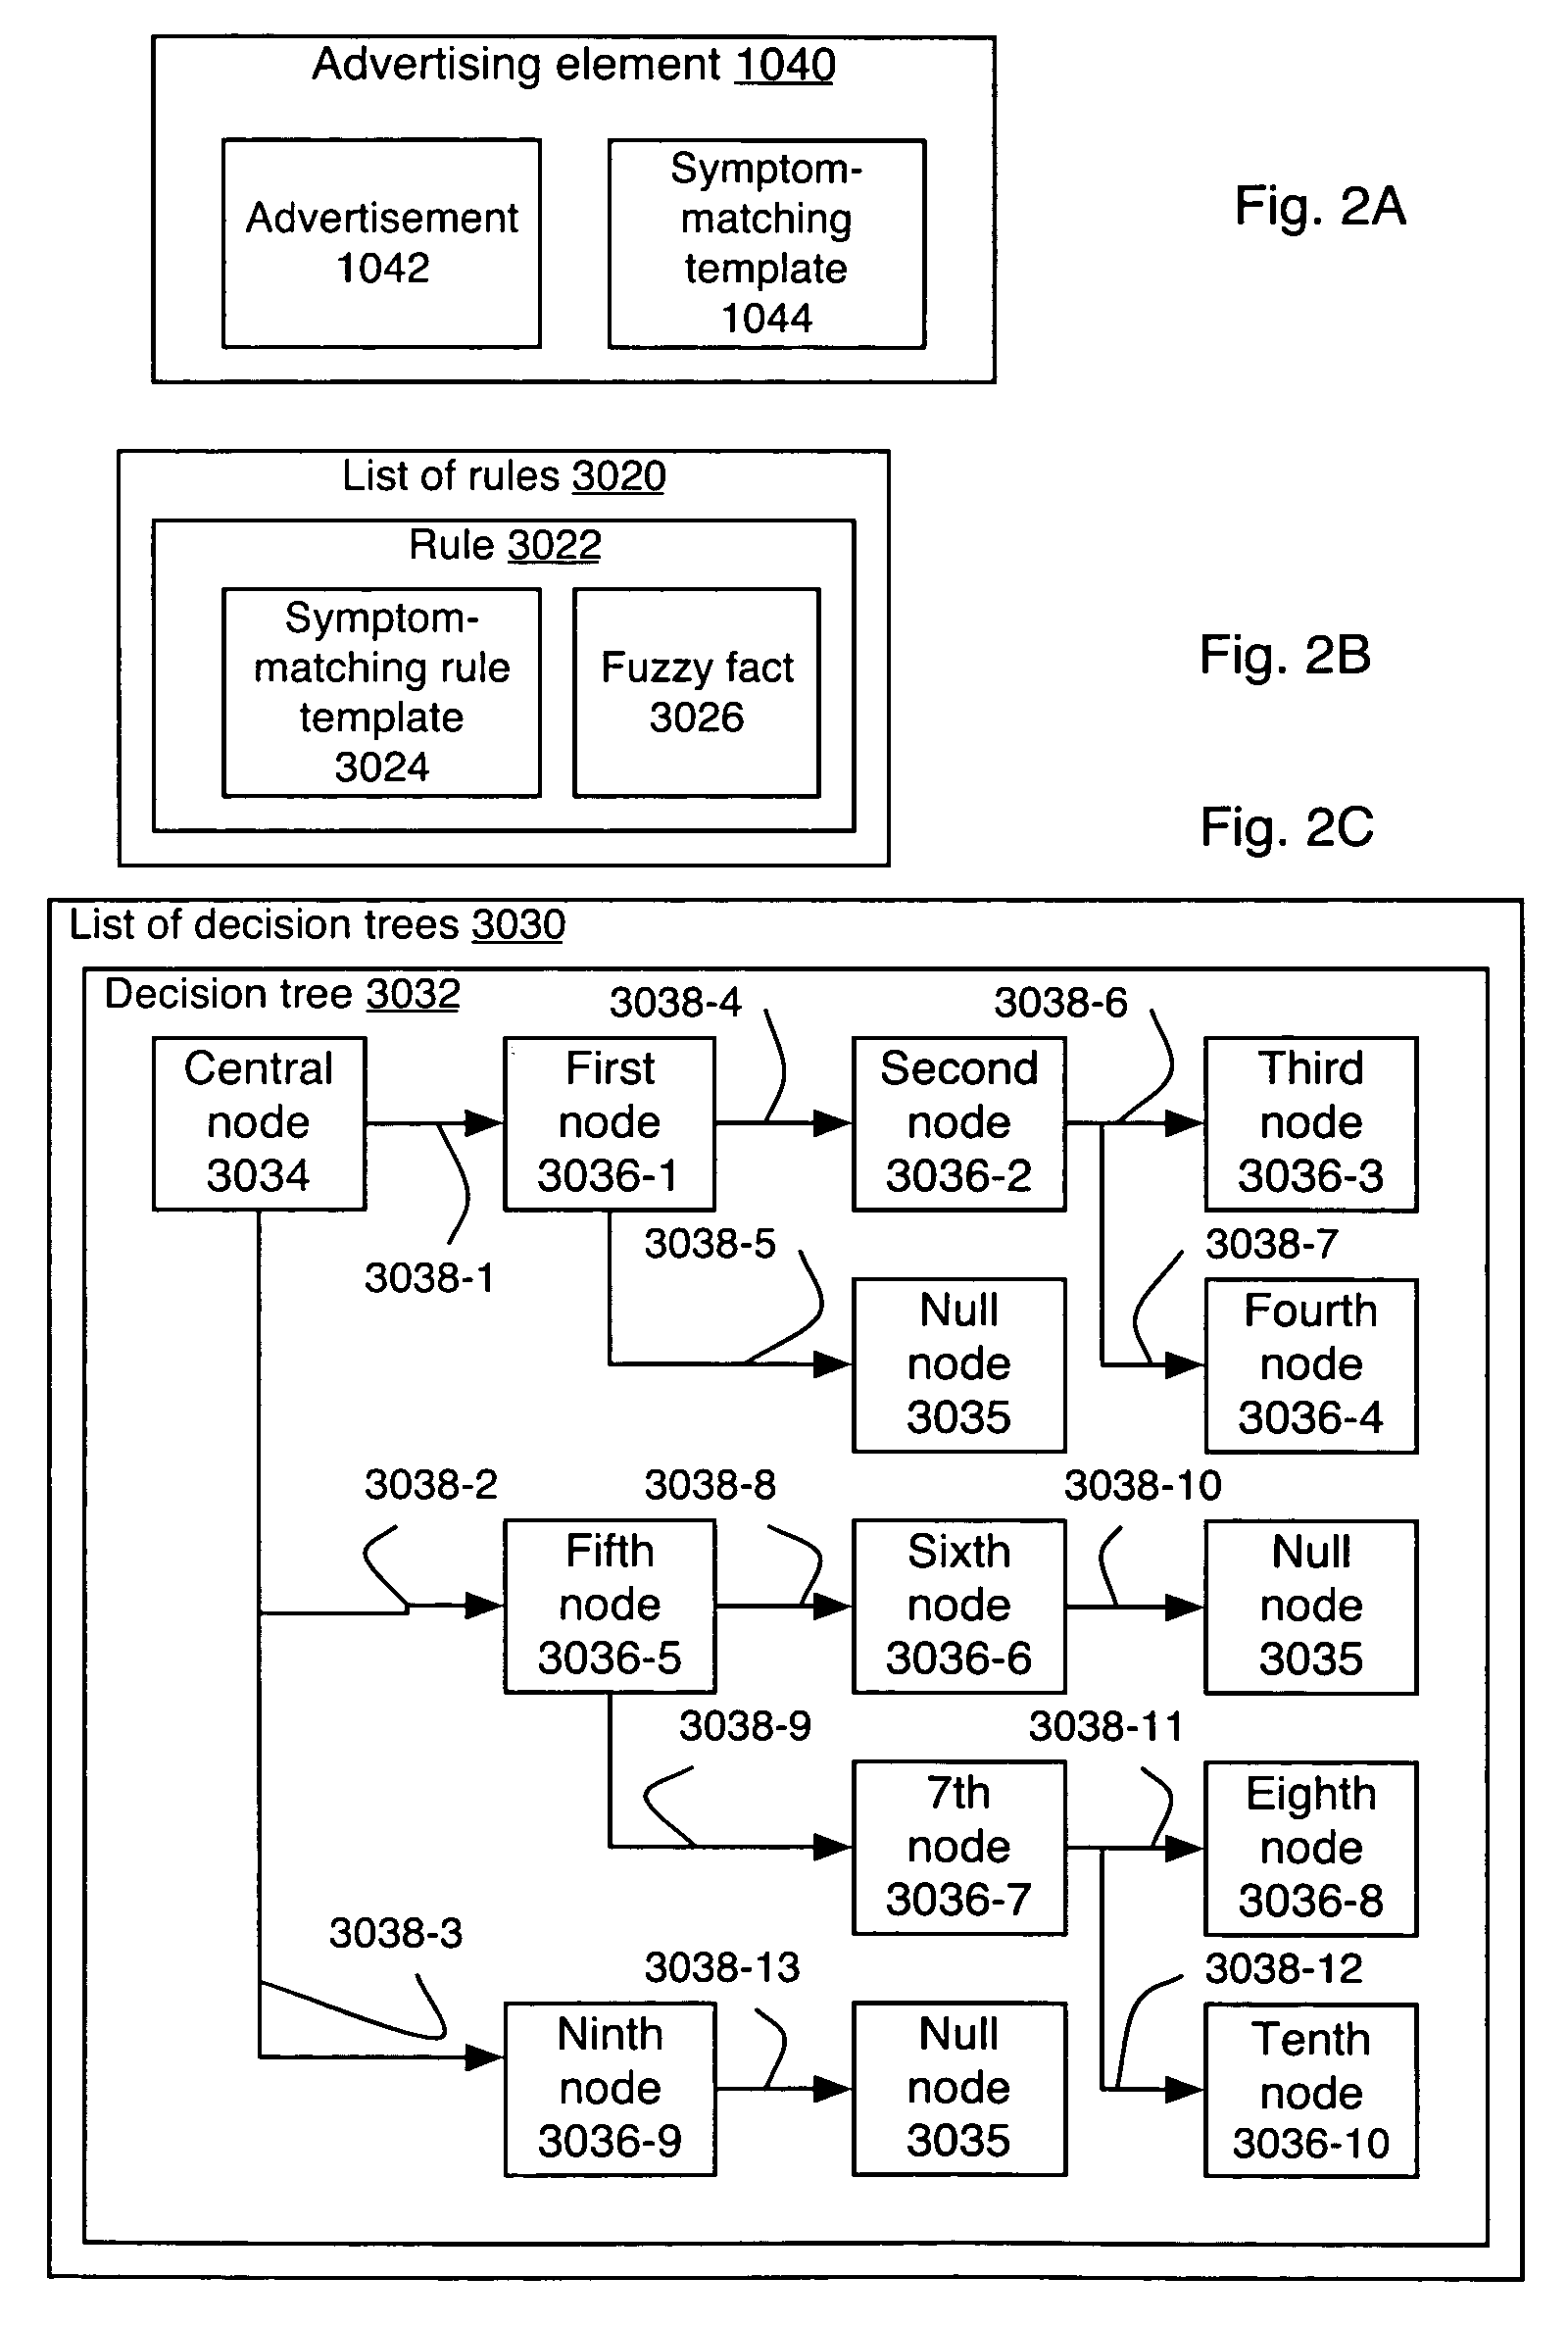 Method and apparatus creating, integrating, and using a patient medical history